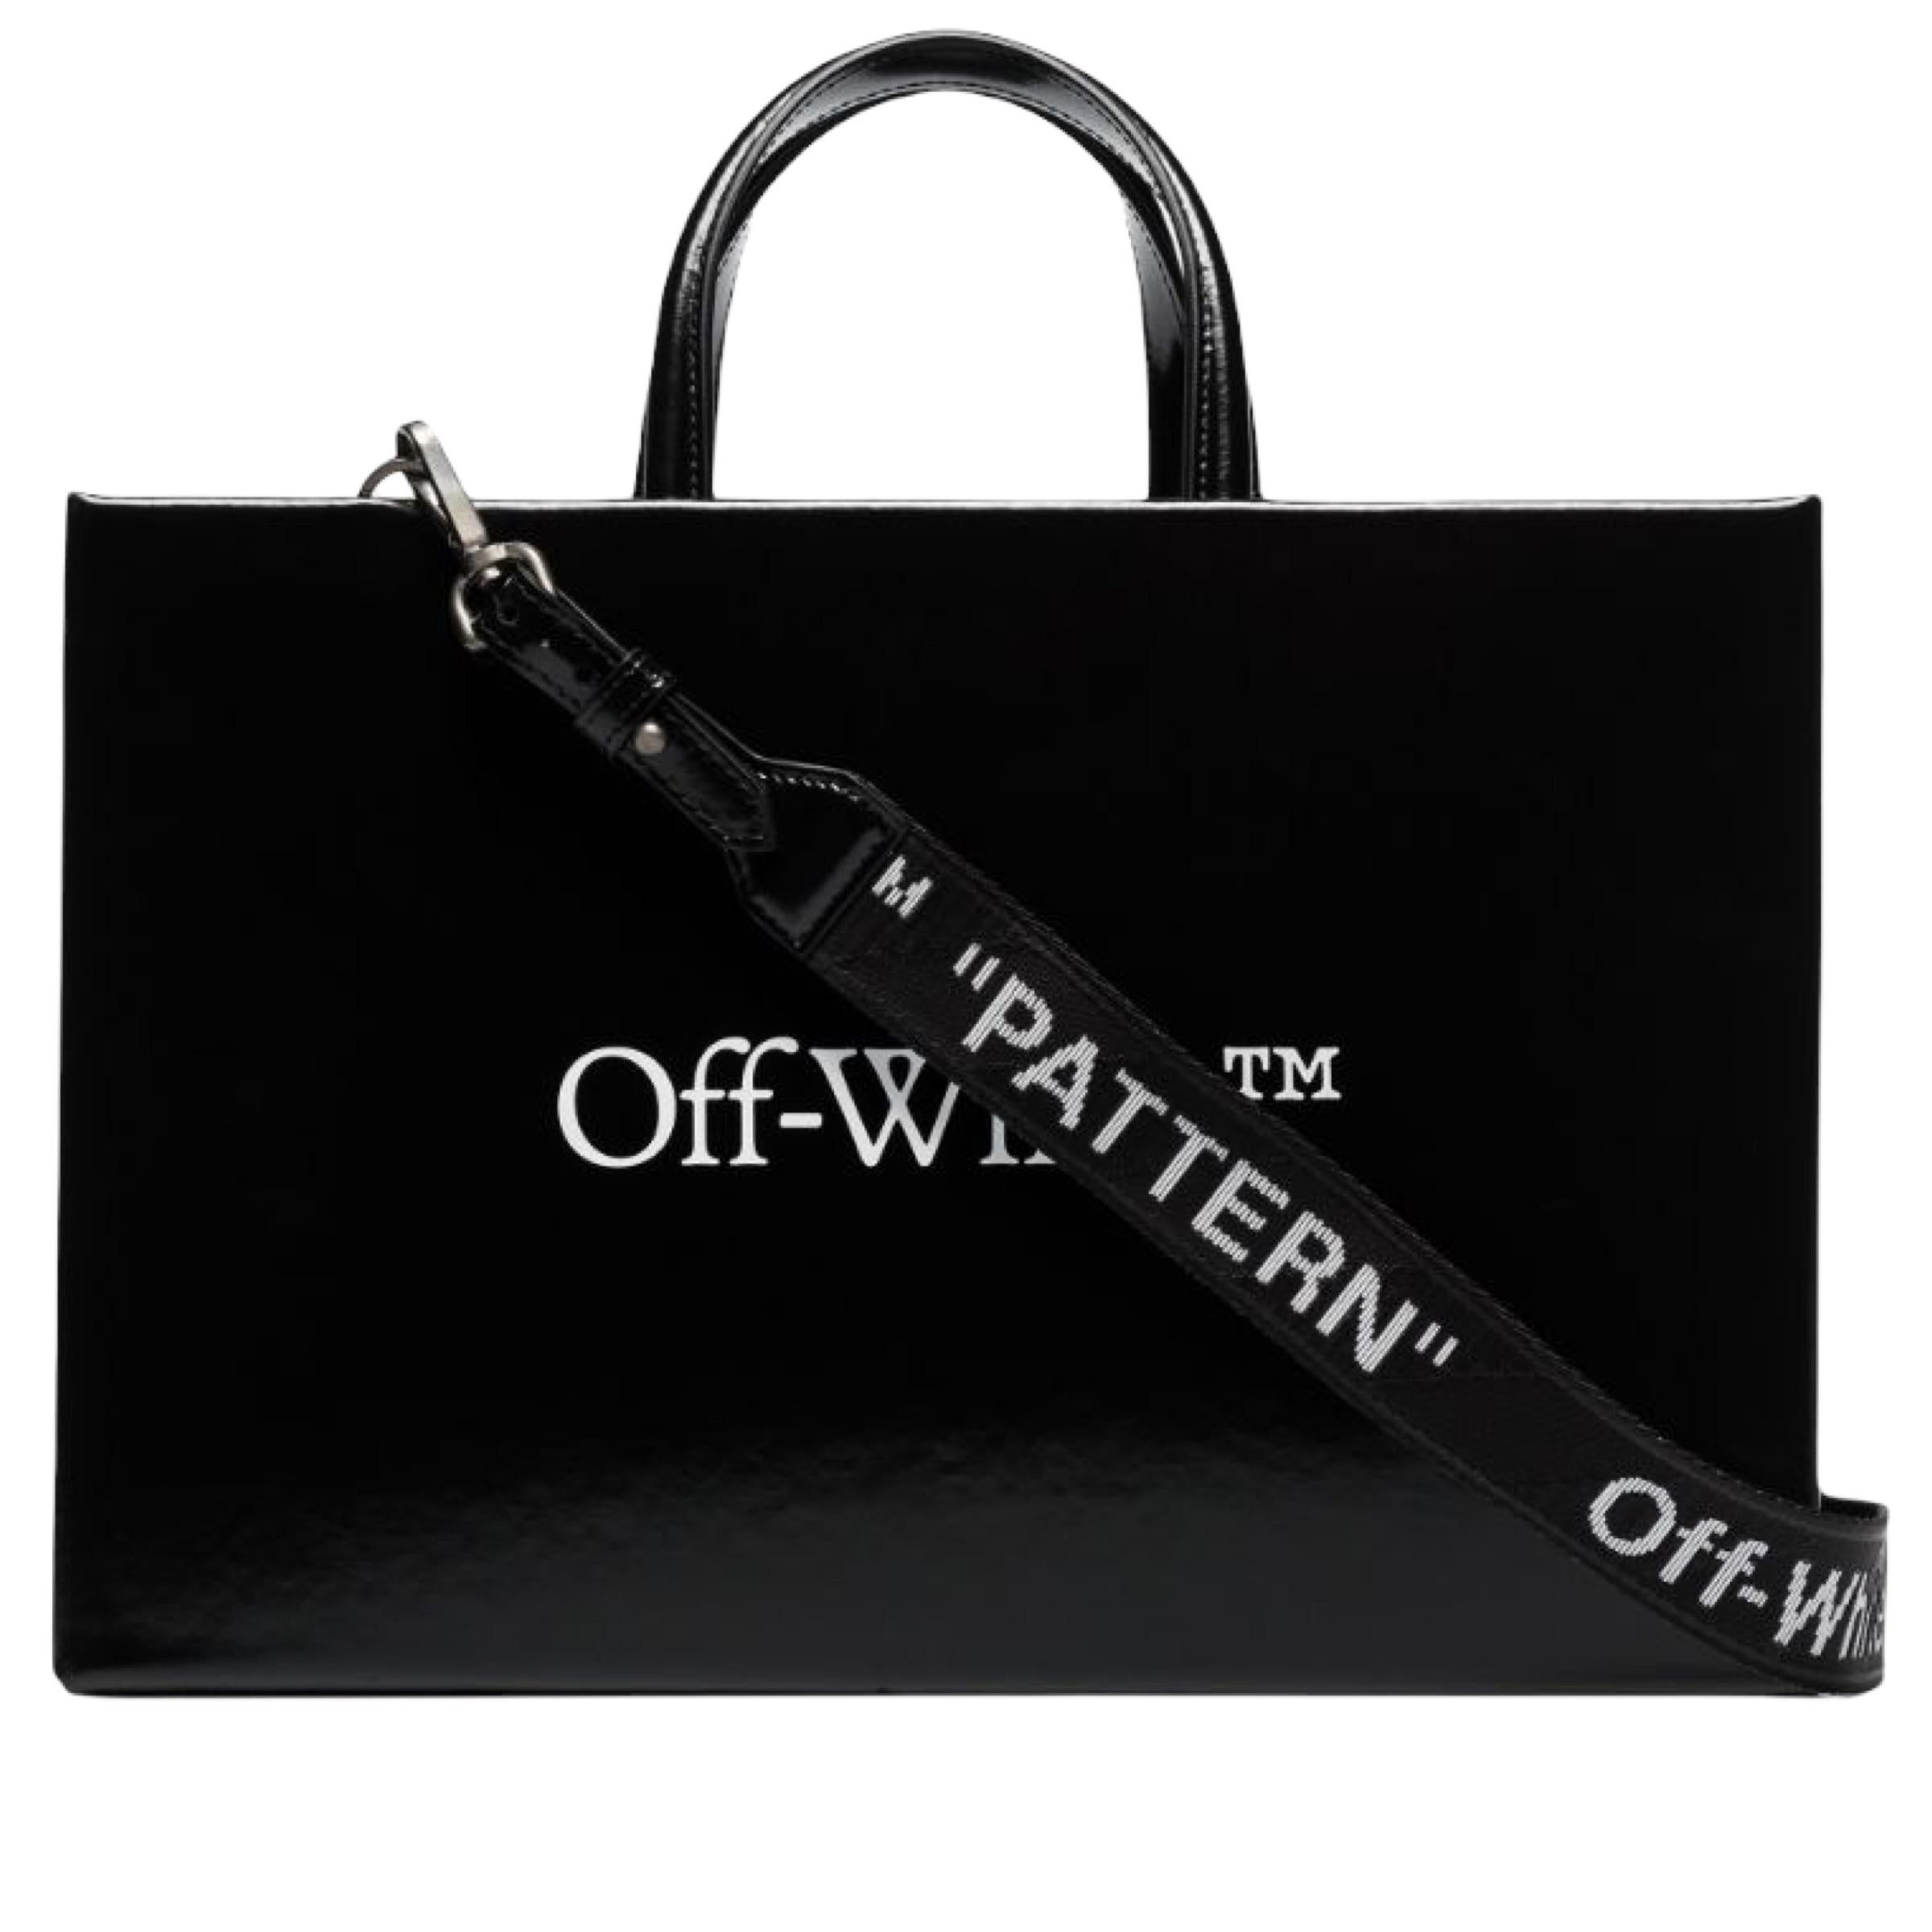 New Off-White Virgil Abloh Black Box Medium Trademark Logo Leather Tote Shoulder Bag

Authenticity Guaranteed

DETAILS
Brand: Off-White Virgil Abloh
Gender: Women
Category: Crossbody bag
Condition: Brand new
Color: Black
Material: Leather
Printed